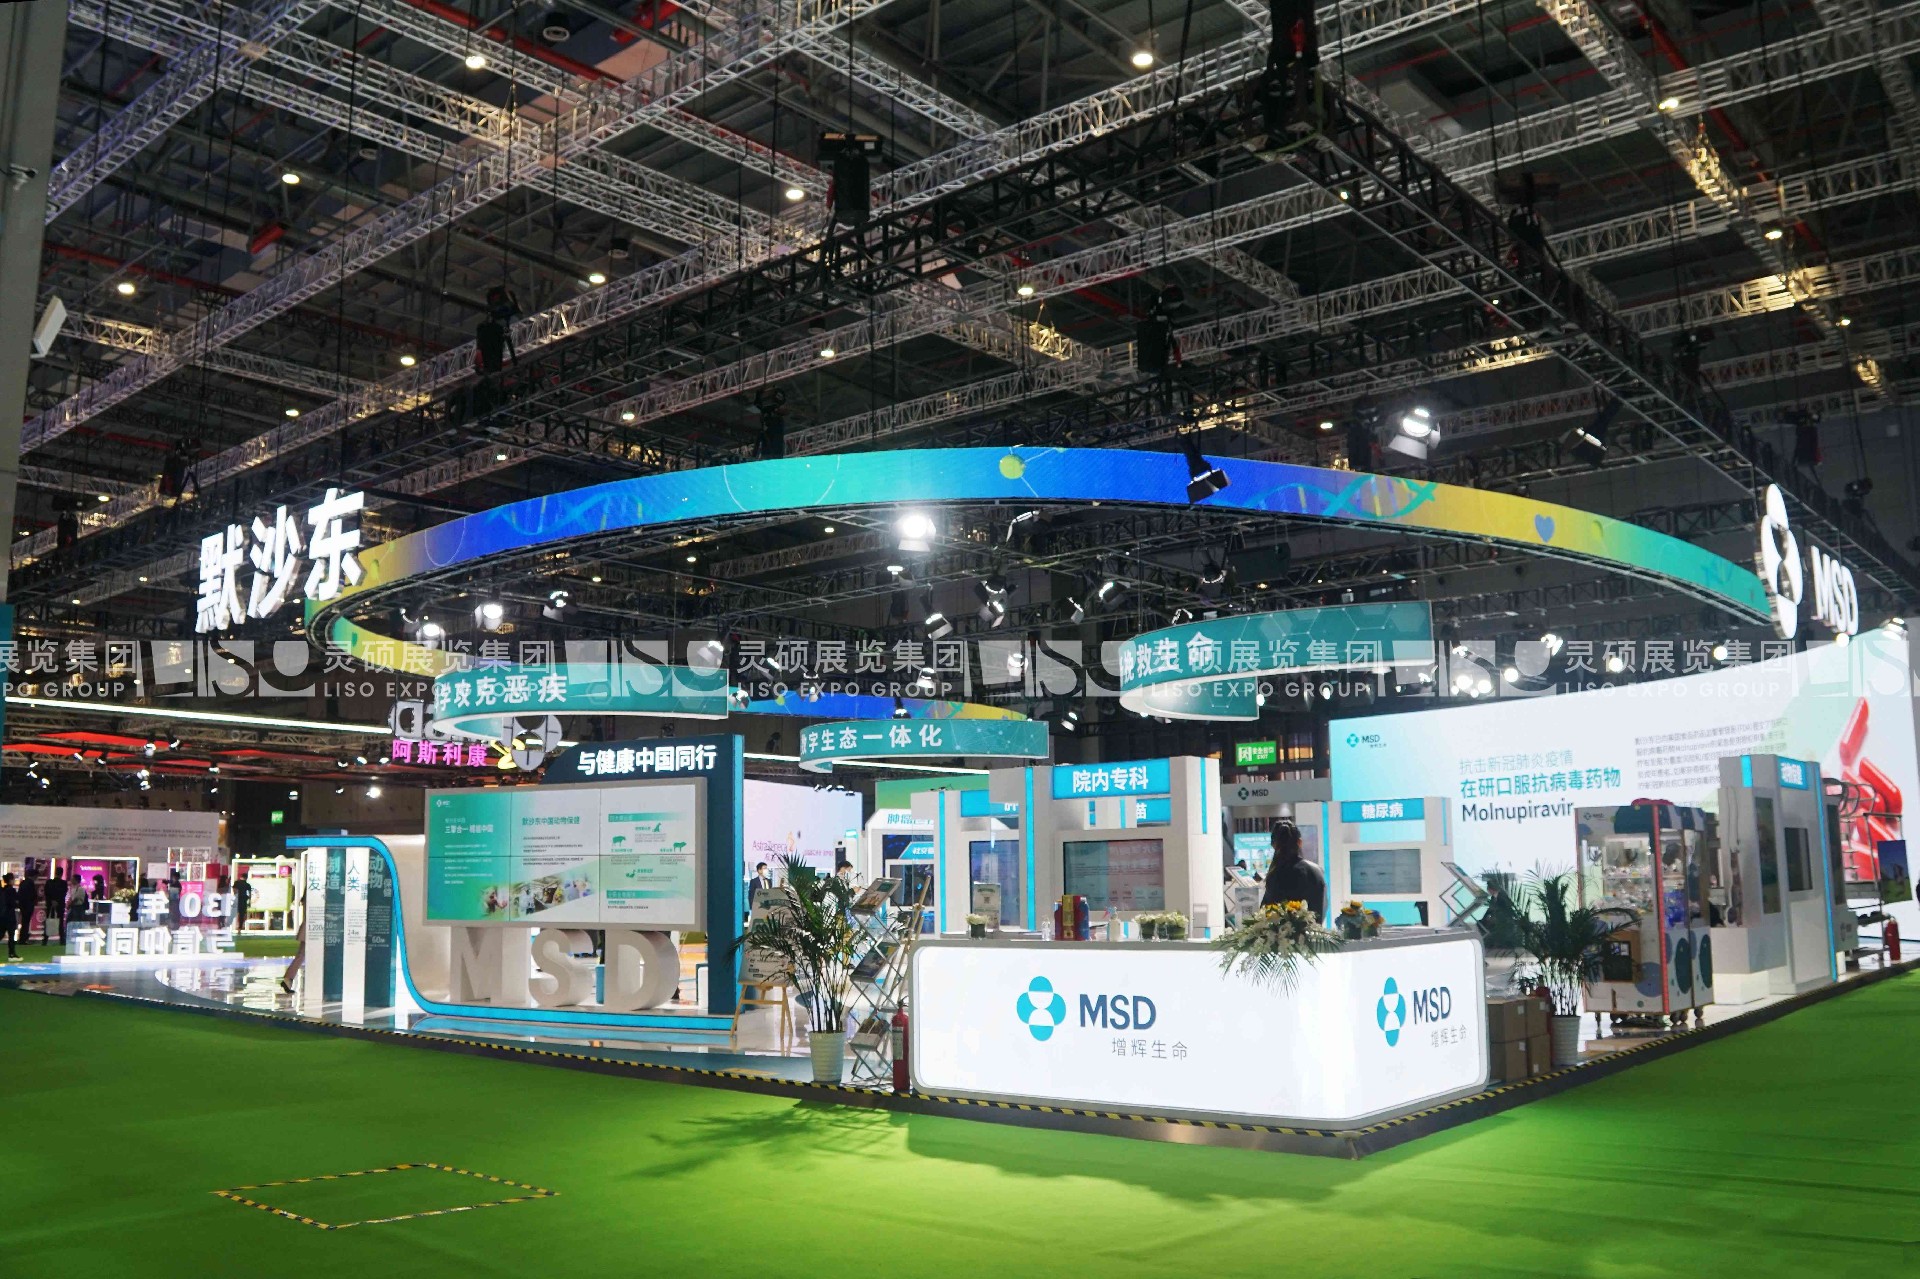 MSD-CIIE Booth Design and Construction Case